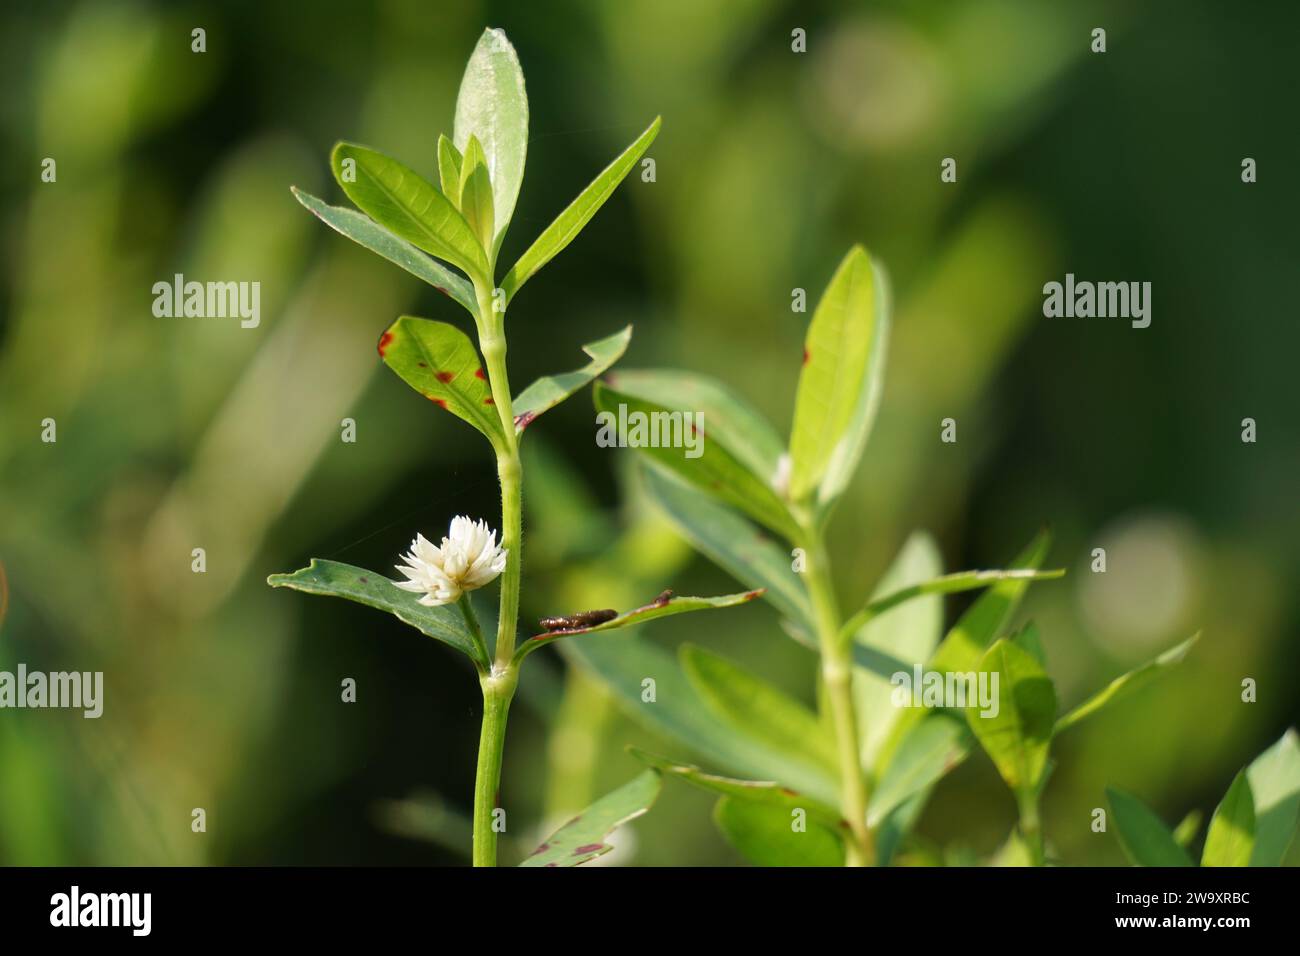 Alligator weed (Alternanthera philoxeroides) with a background. The exotic tropical grass with a special aroma. The grass is growing in the garden. Stock Photo